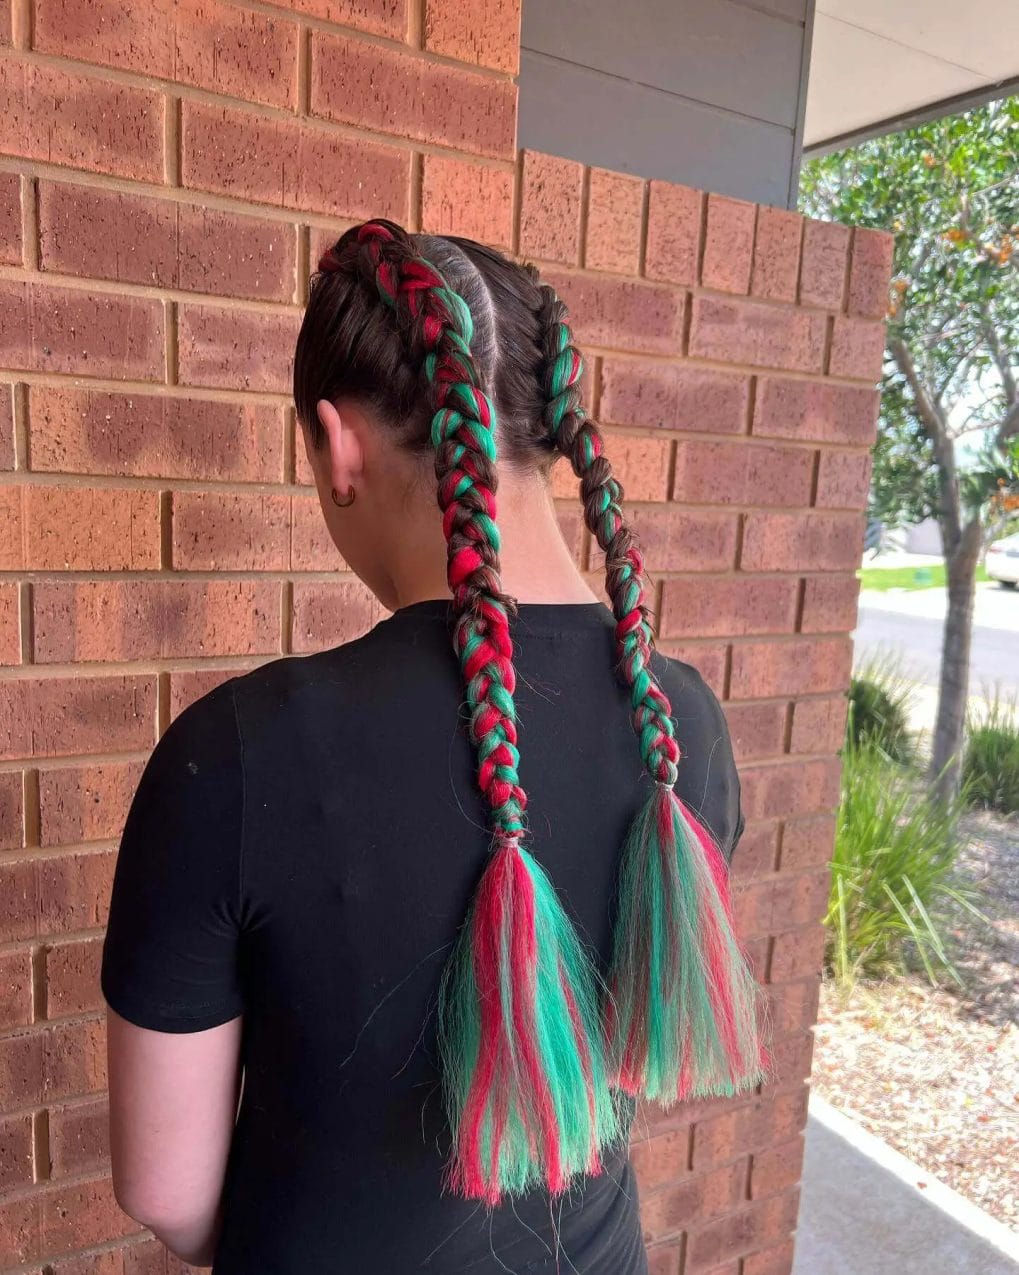 Green and red braids with teal and pink tasseled ends